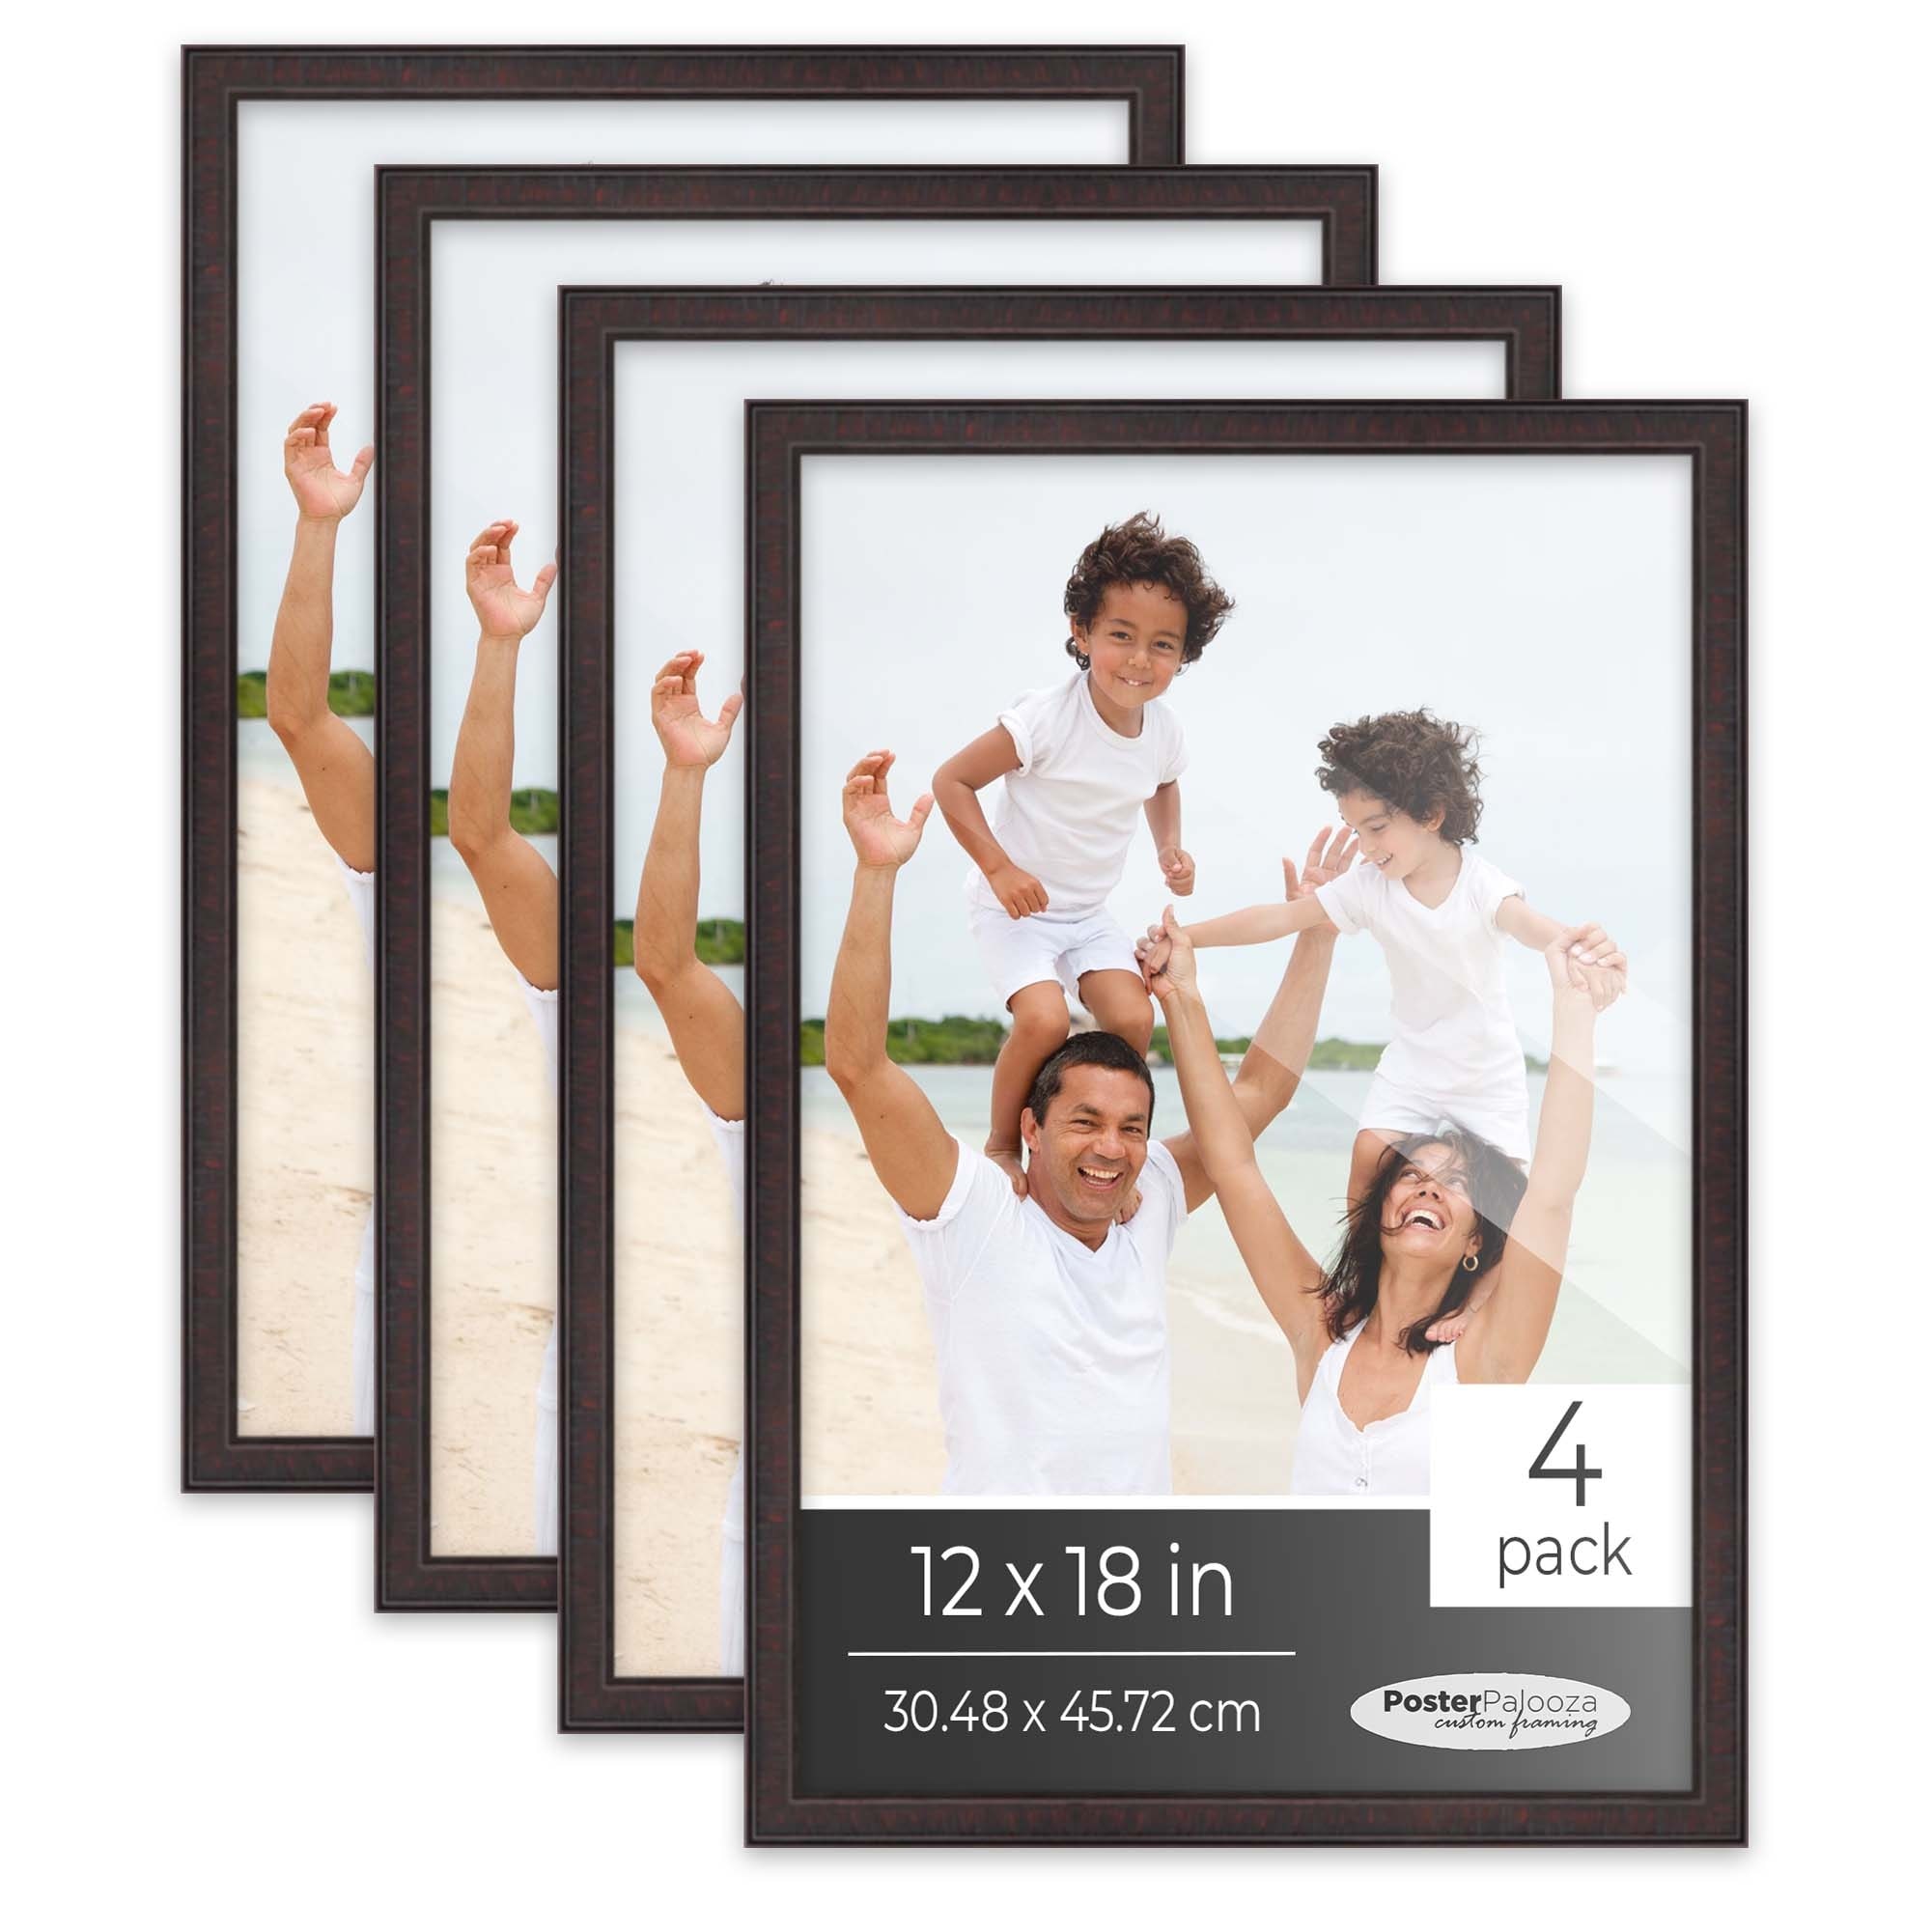 DesignOvation Gallery Wood Wall Picture Frame Walnut Brown (Set of